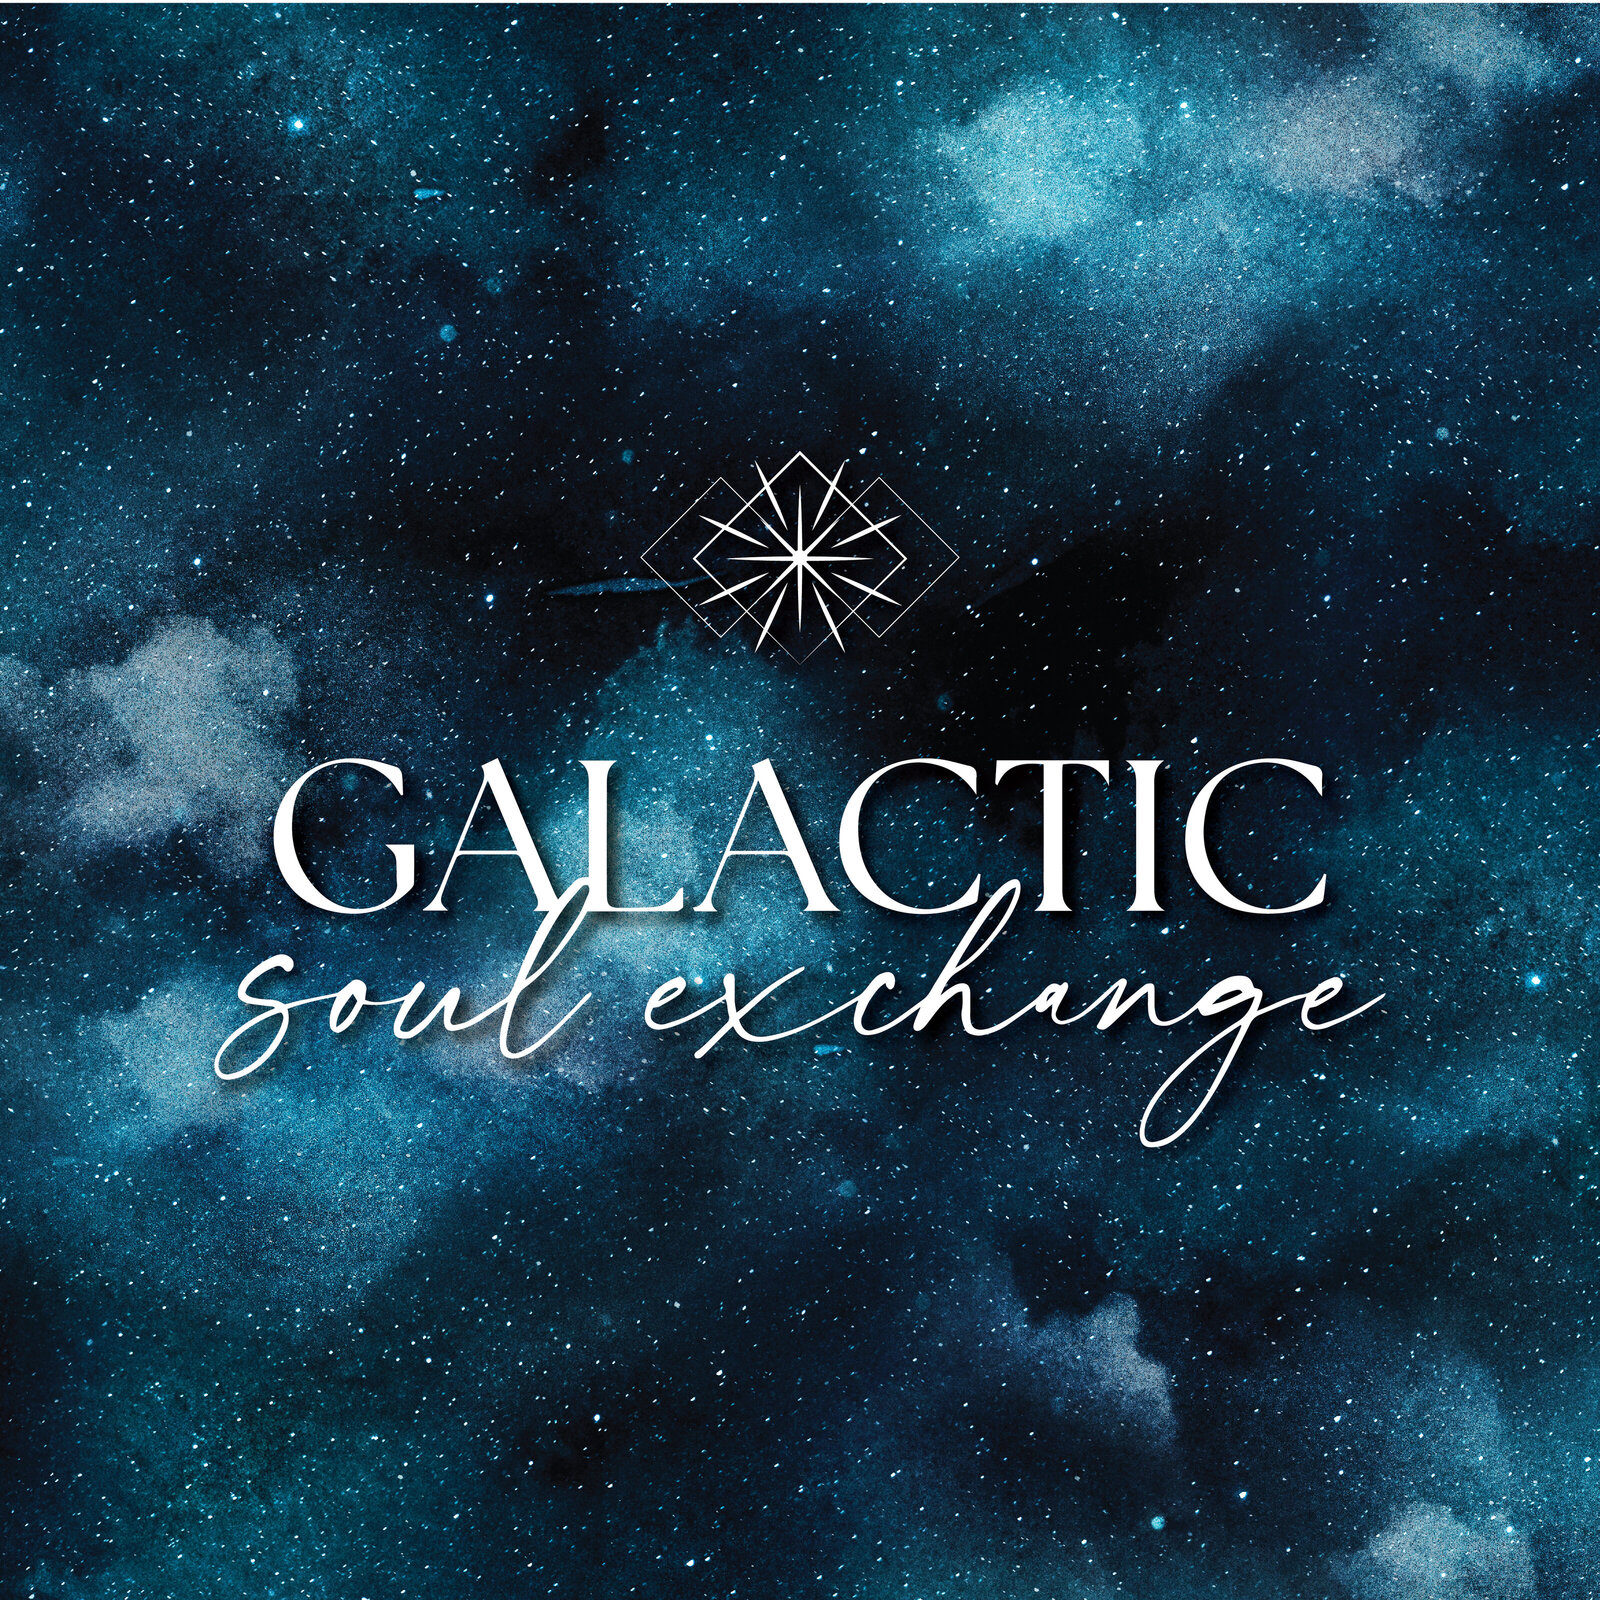 Logo with text "Galactic Soul Exchange"